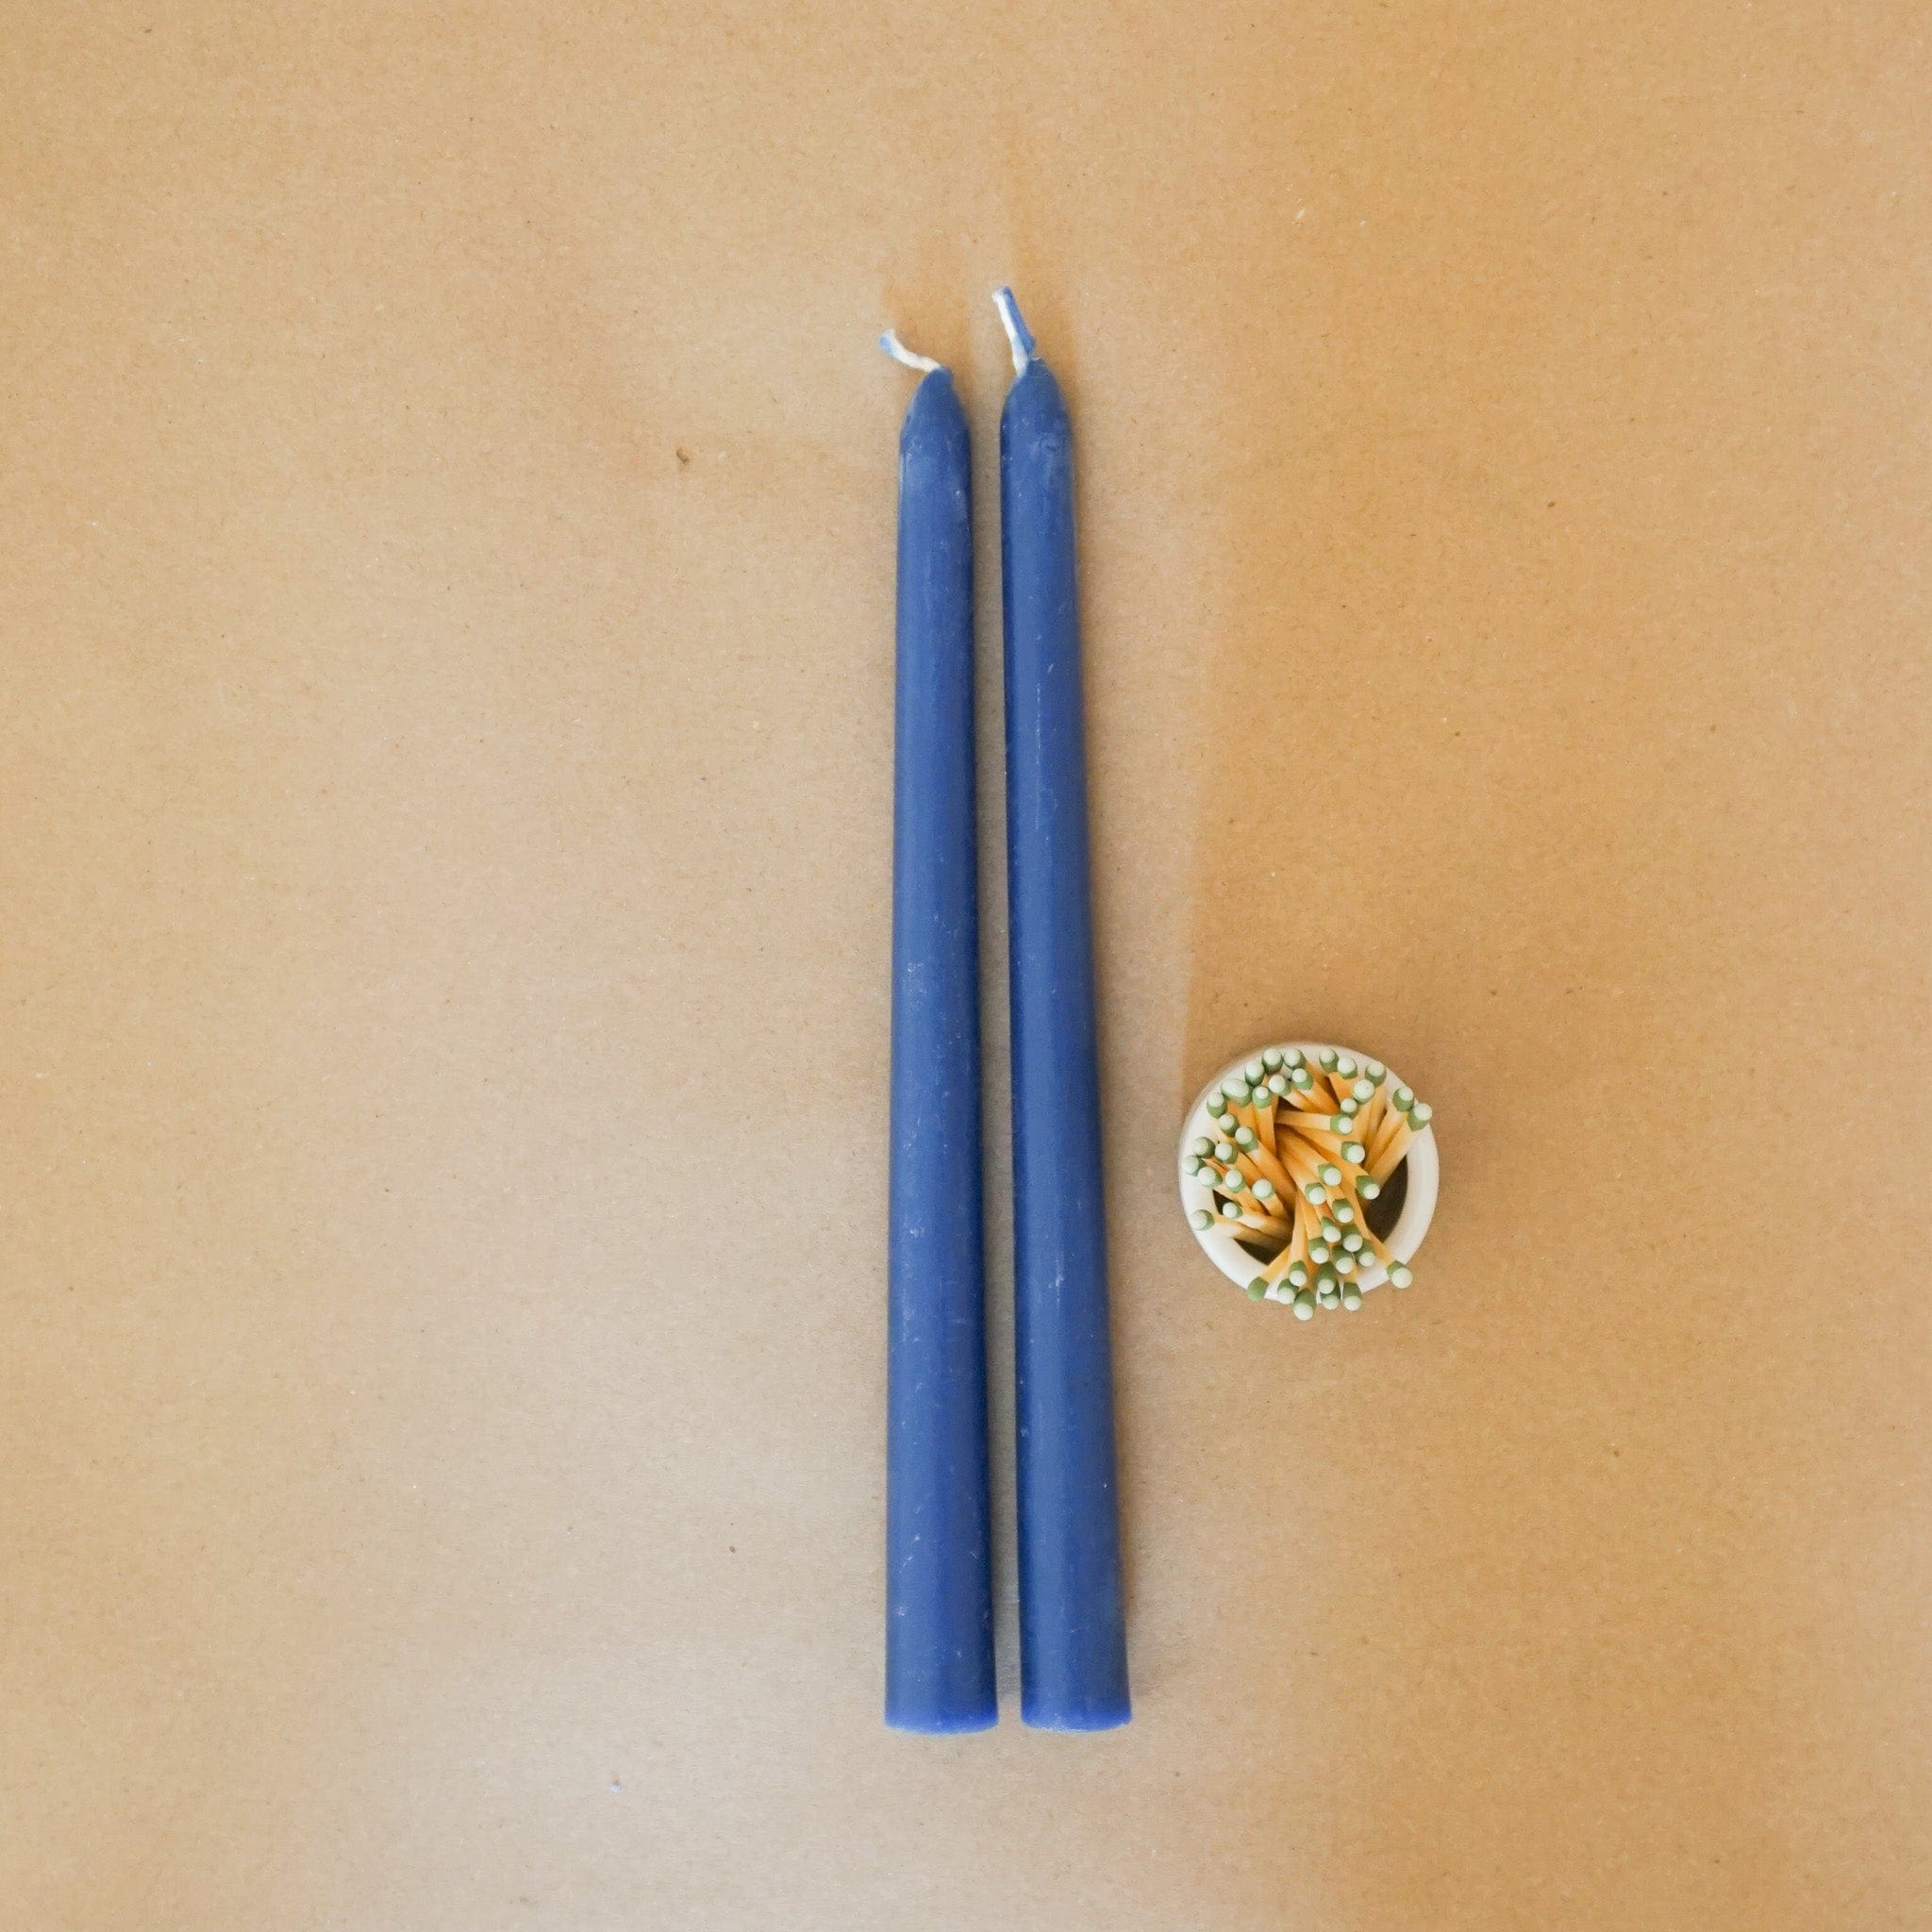 GREENTREE CANDLES Decor 10 / Cobalt Taper Candles by Greentree - Cobalt